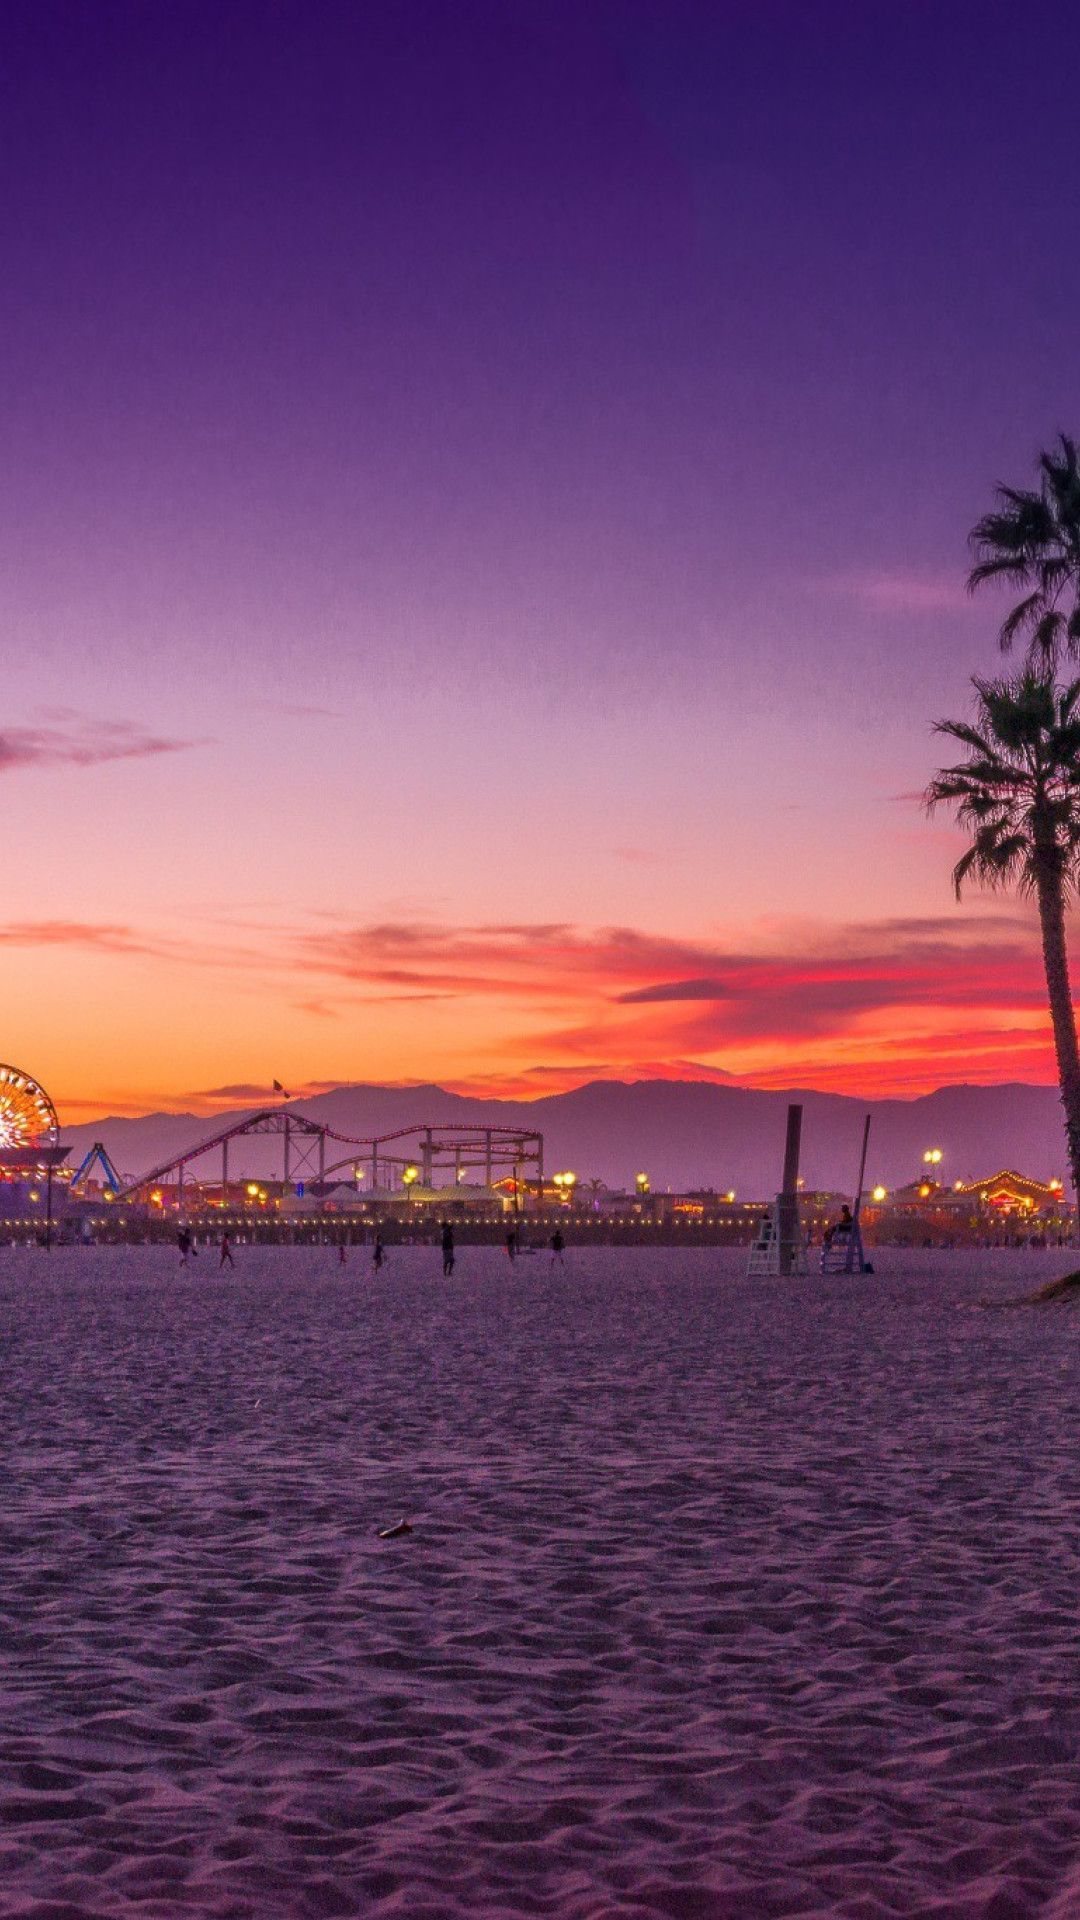 A beach with palm trees and an amusement park - Los Angeles